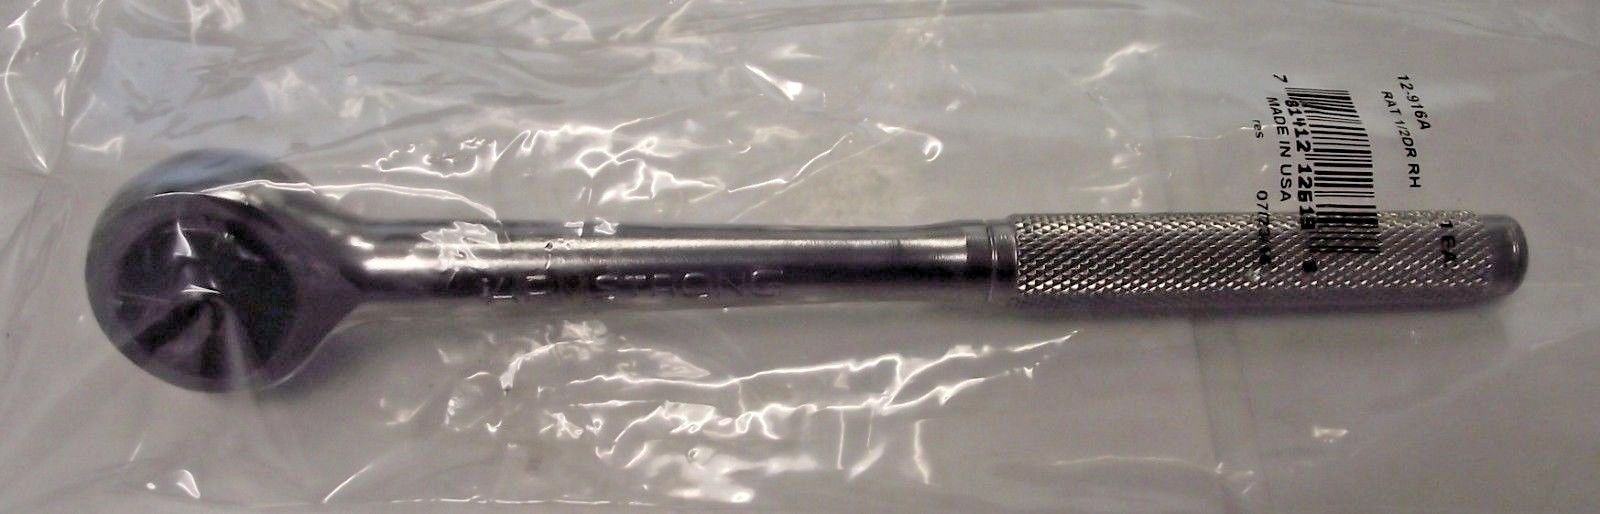 Armstrong 12-916A 1/2" Drive Roundhead Ratchet 7-1/2" Knurled Handle USA